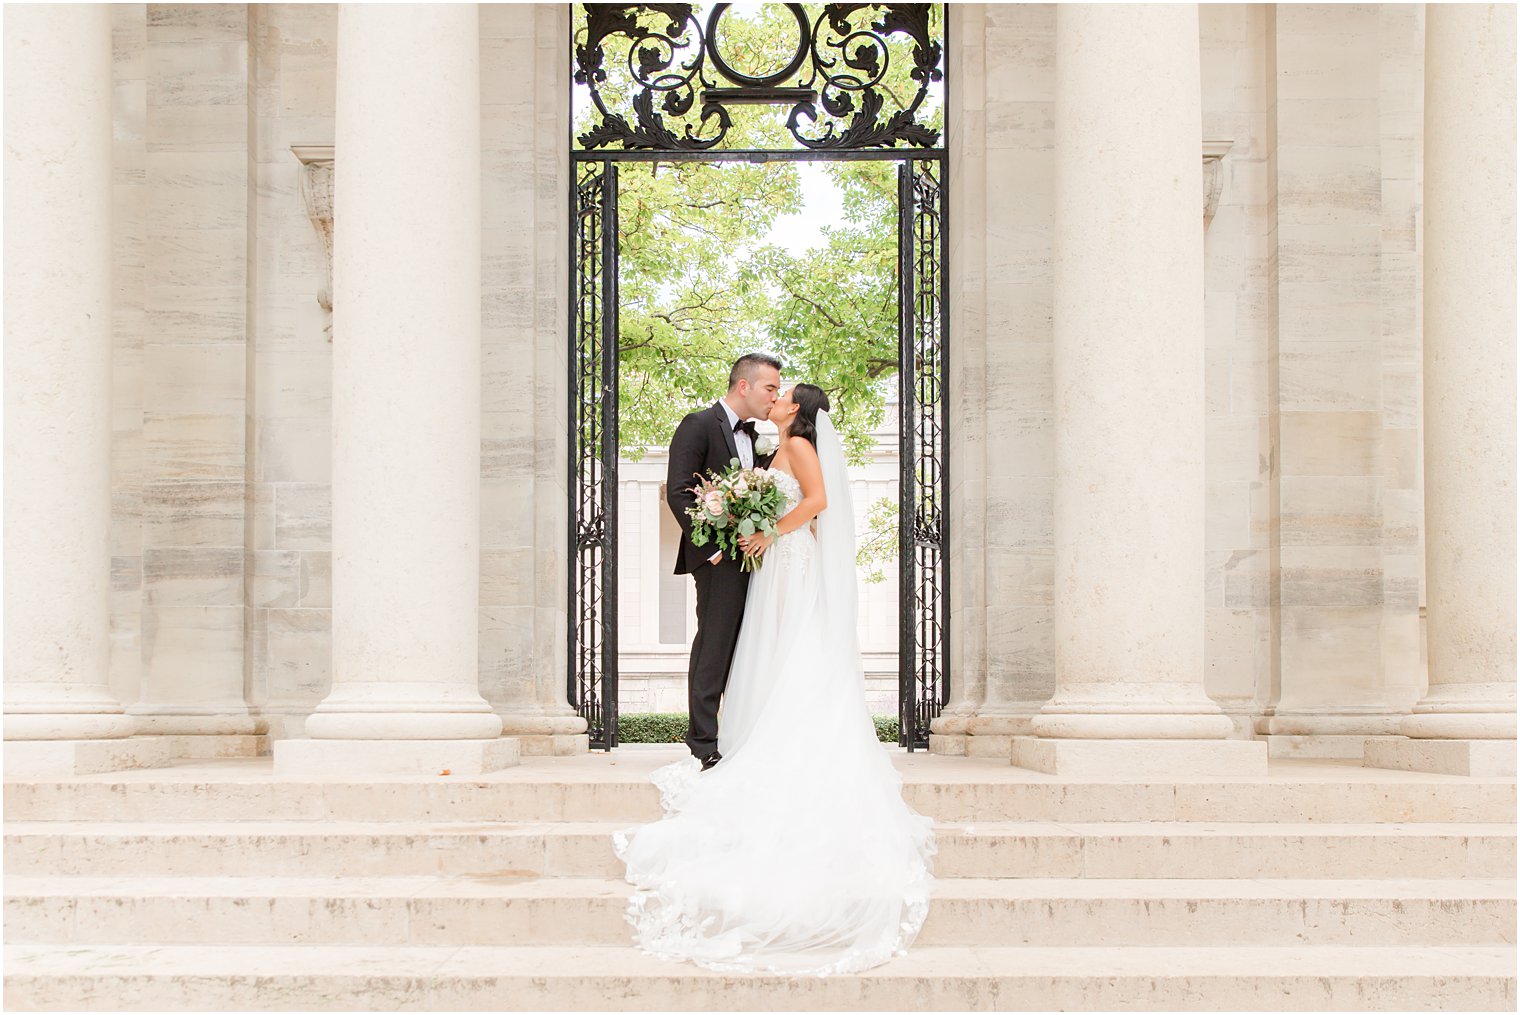 bride and groom kiss on steps between columns at the Rodin Museum